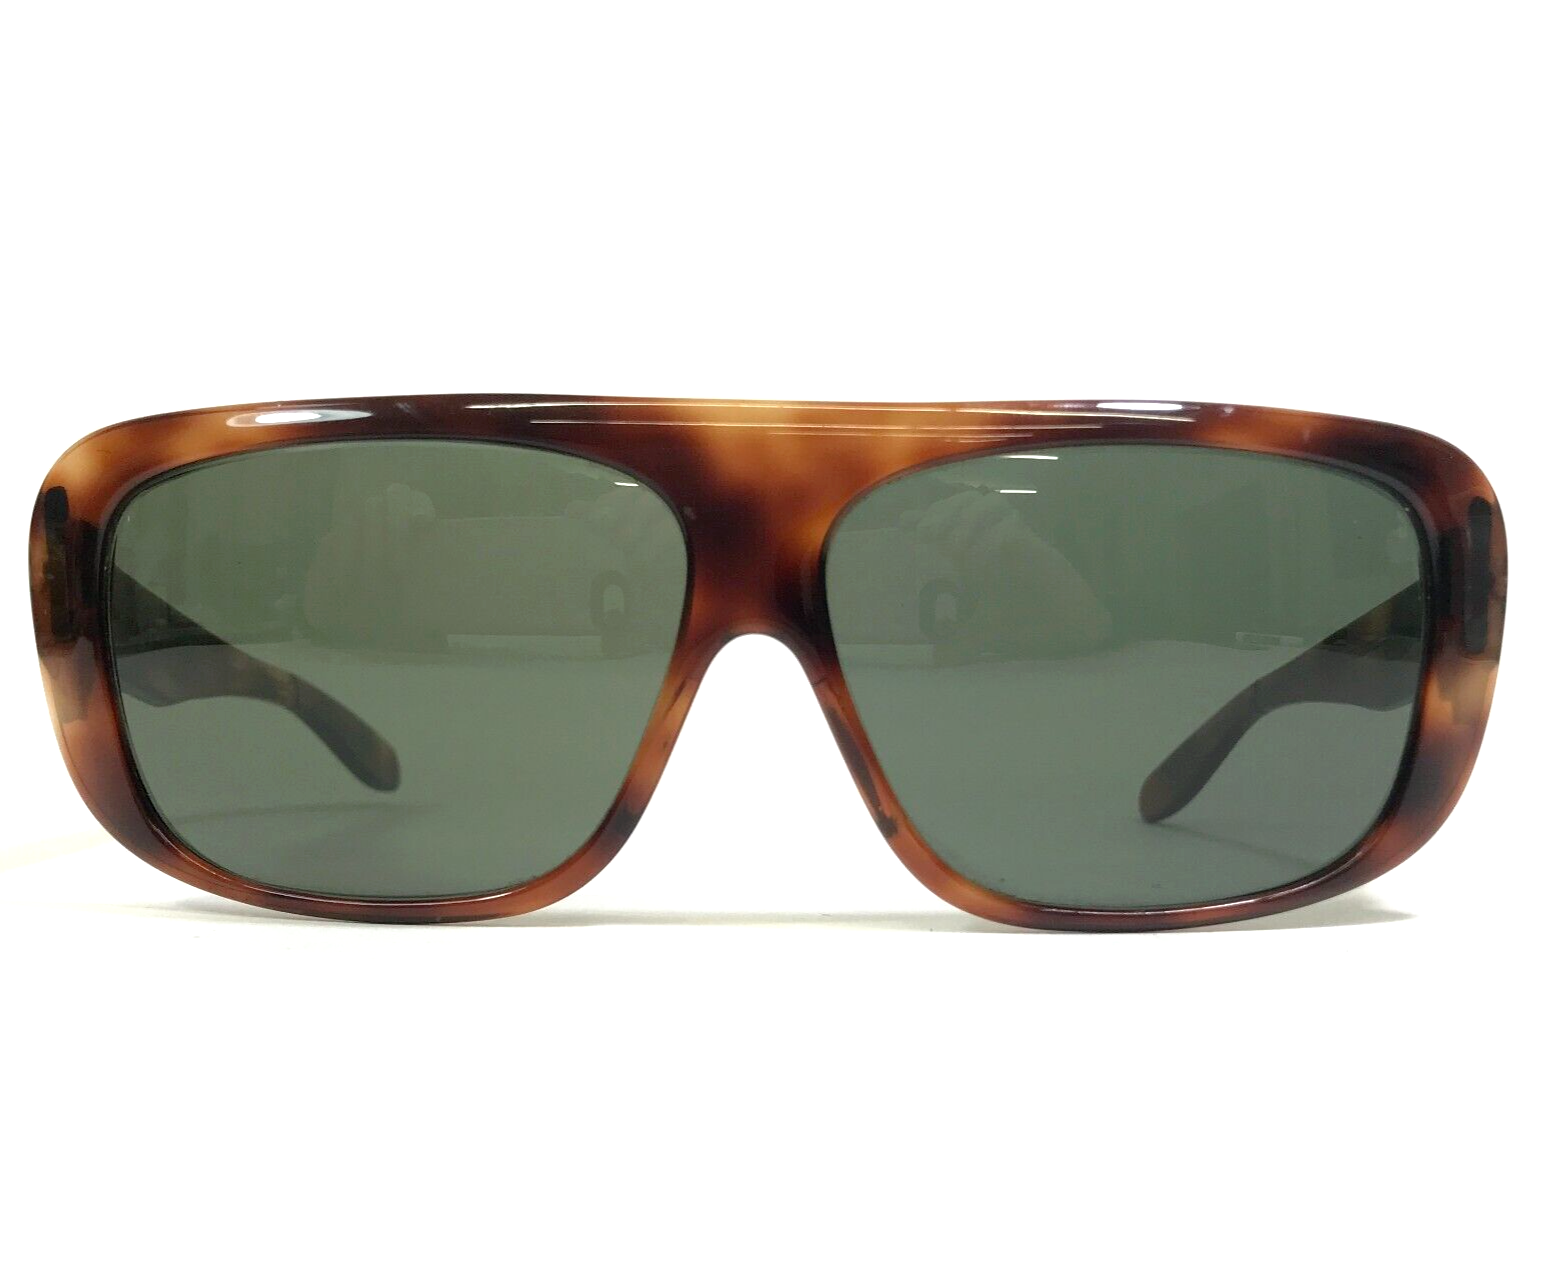 Vintage Bausch & Lomb B&L Ray-Ban Sunglasses BLAIR Oversized with Green Lenses - $102.38